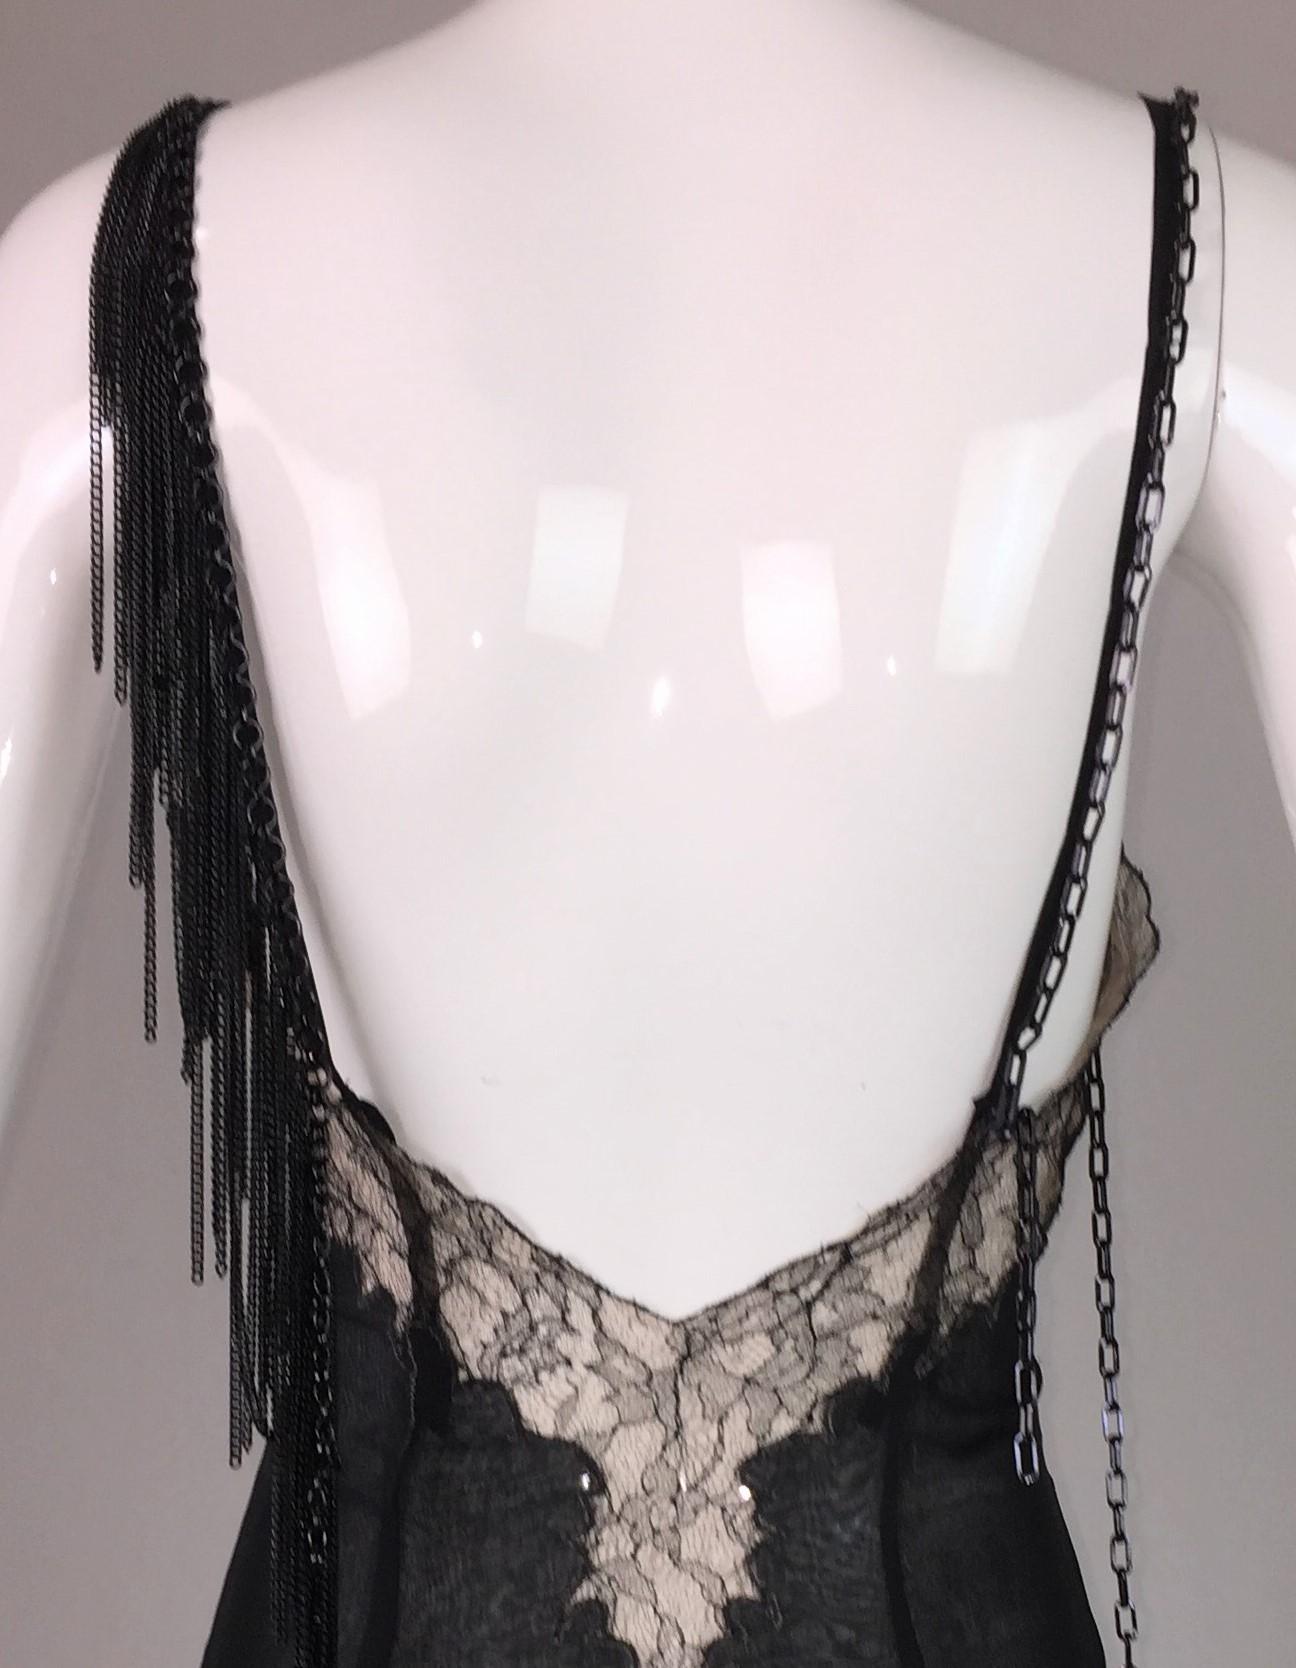 Women's 2004 Versace Black Sheer Plunging Chain Embellished Gown Dress w Train